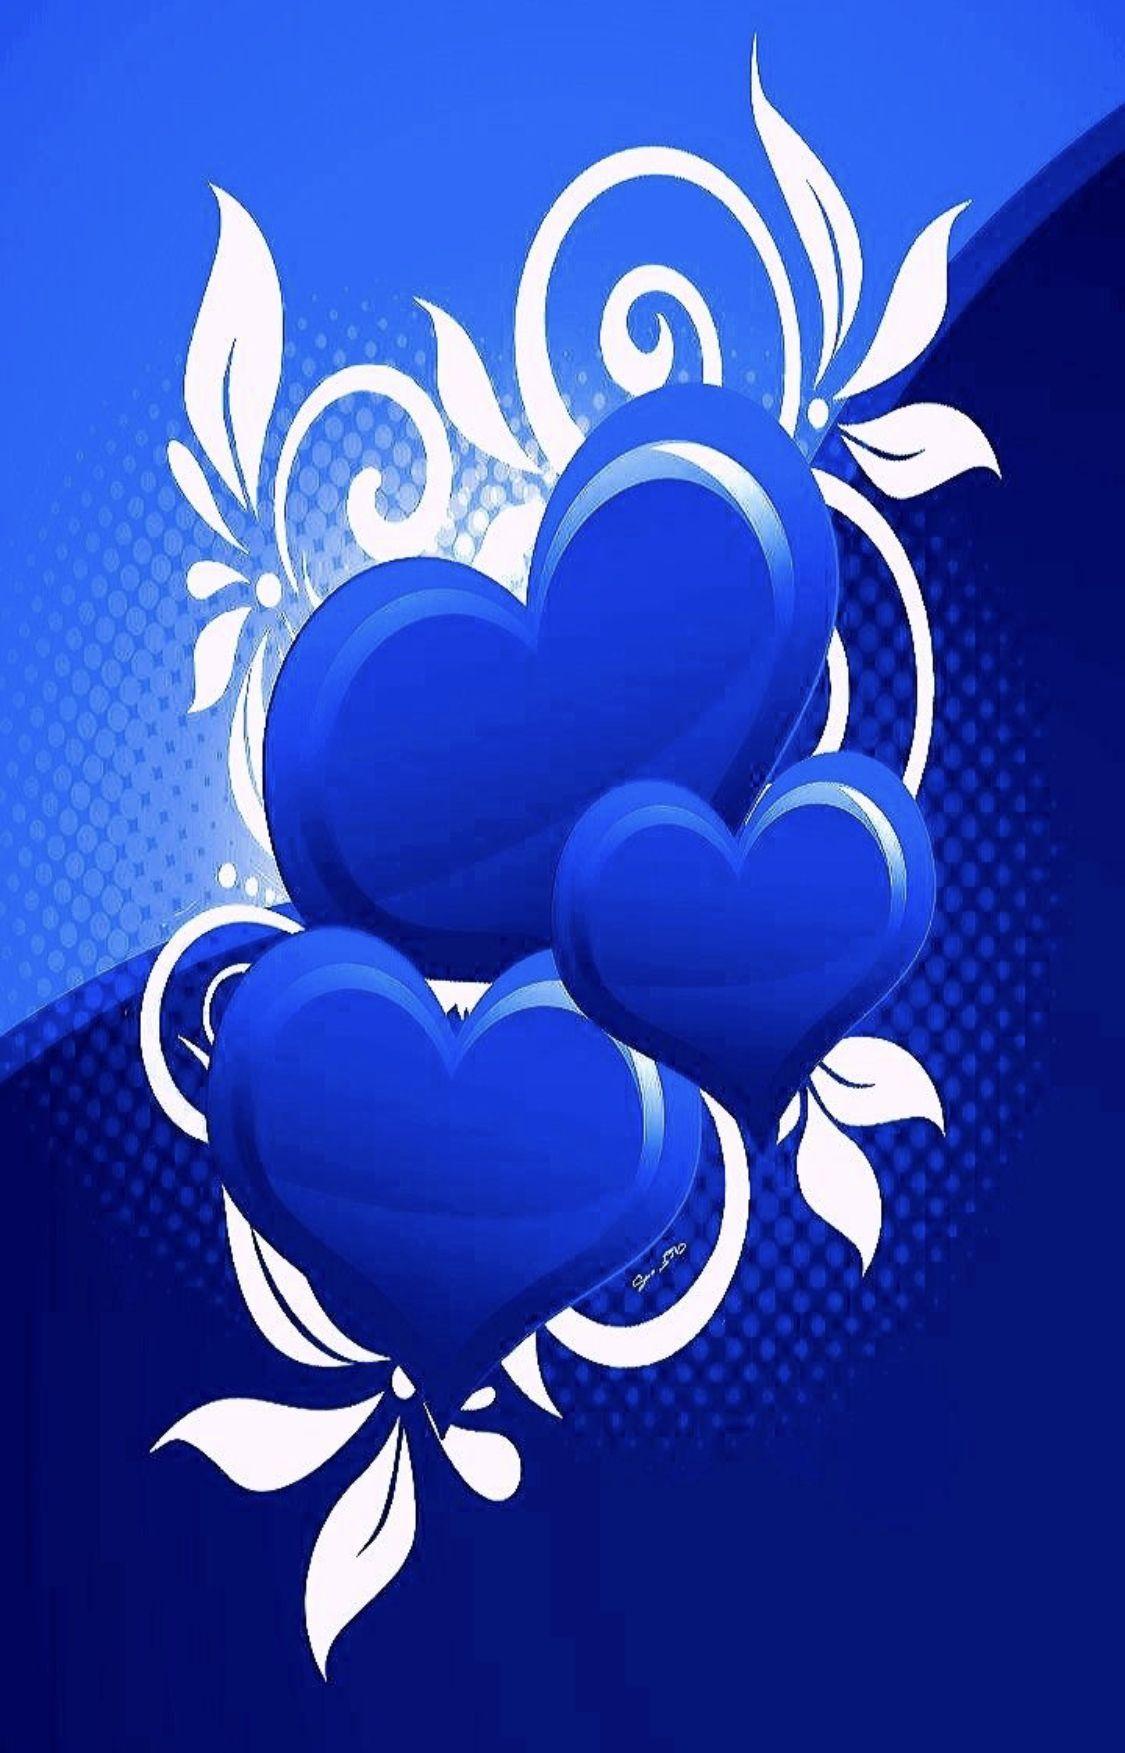 Heart Shaped Diamond Background, Blue Heart Pictures Background Image And  Wallpaper for Free Download